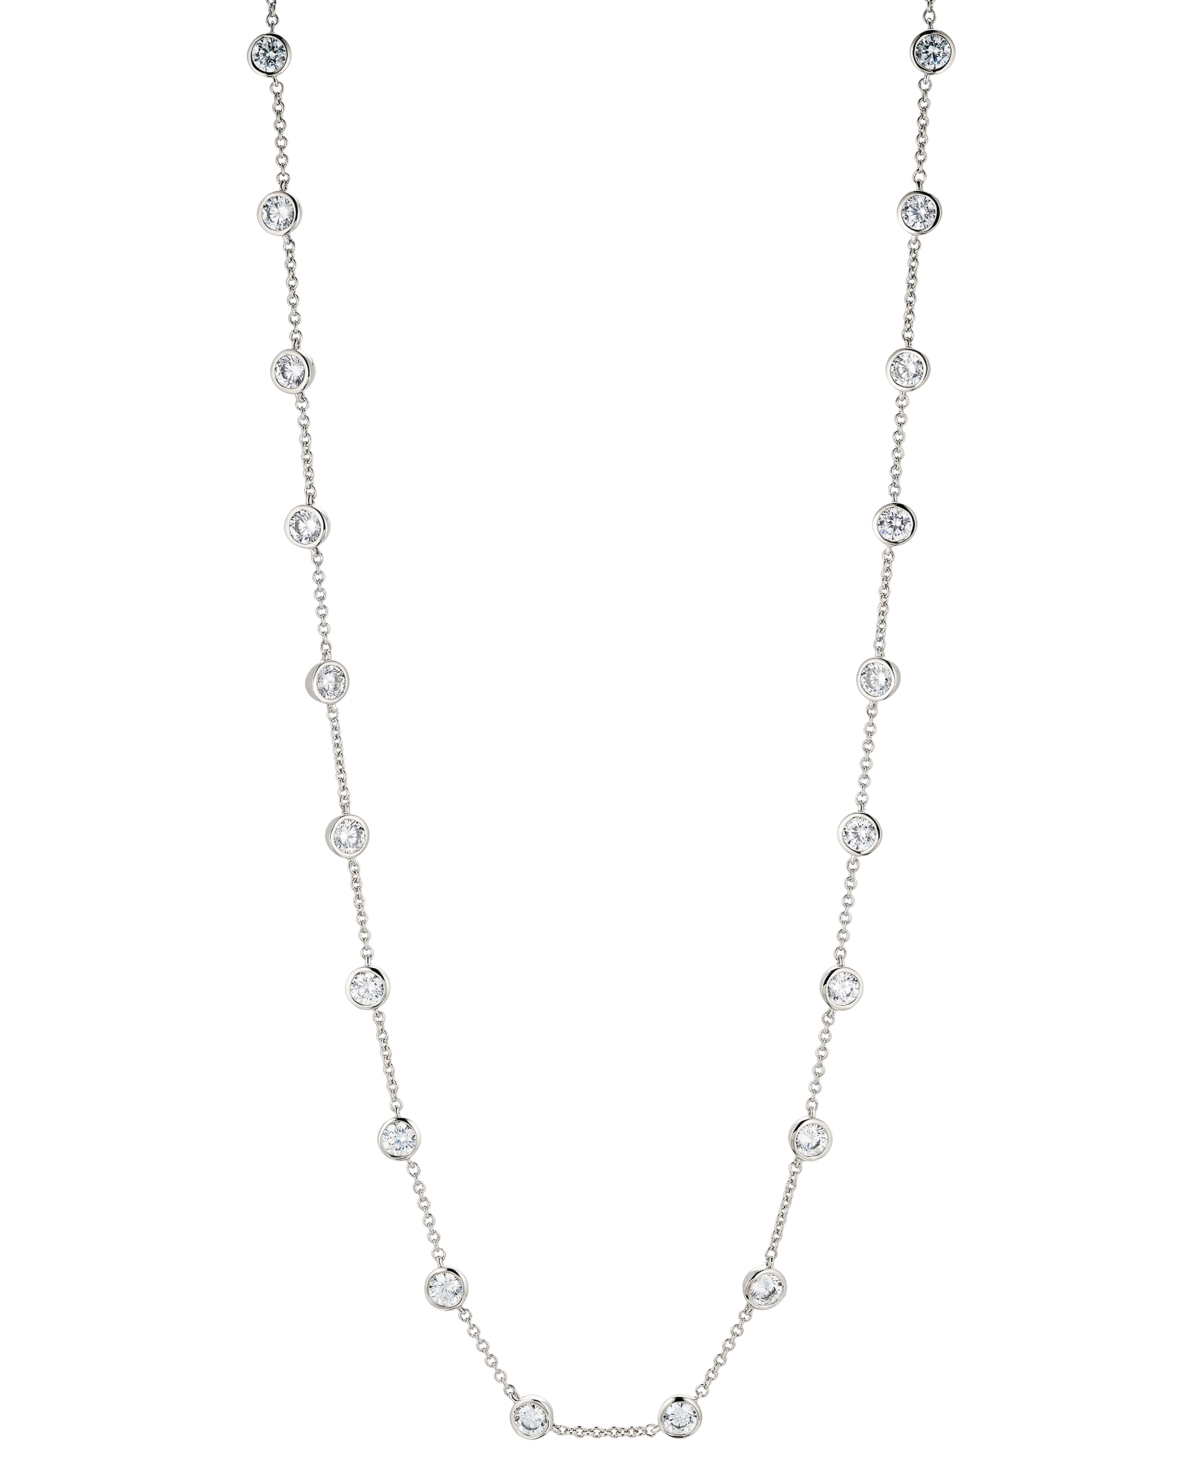 Eliot Danori Silver-tone Cubic Zirconia Station Necklace, 15" + 3" Extender, Created For Macy's